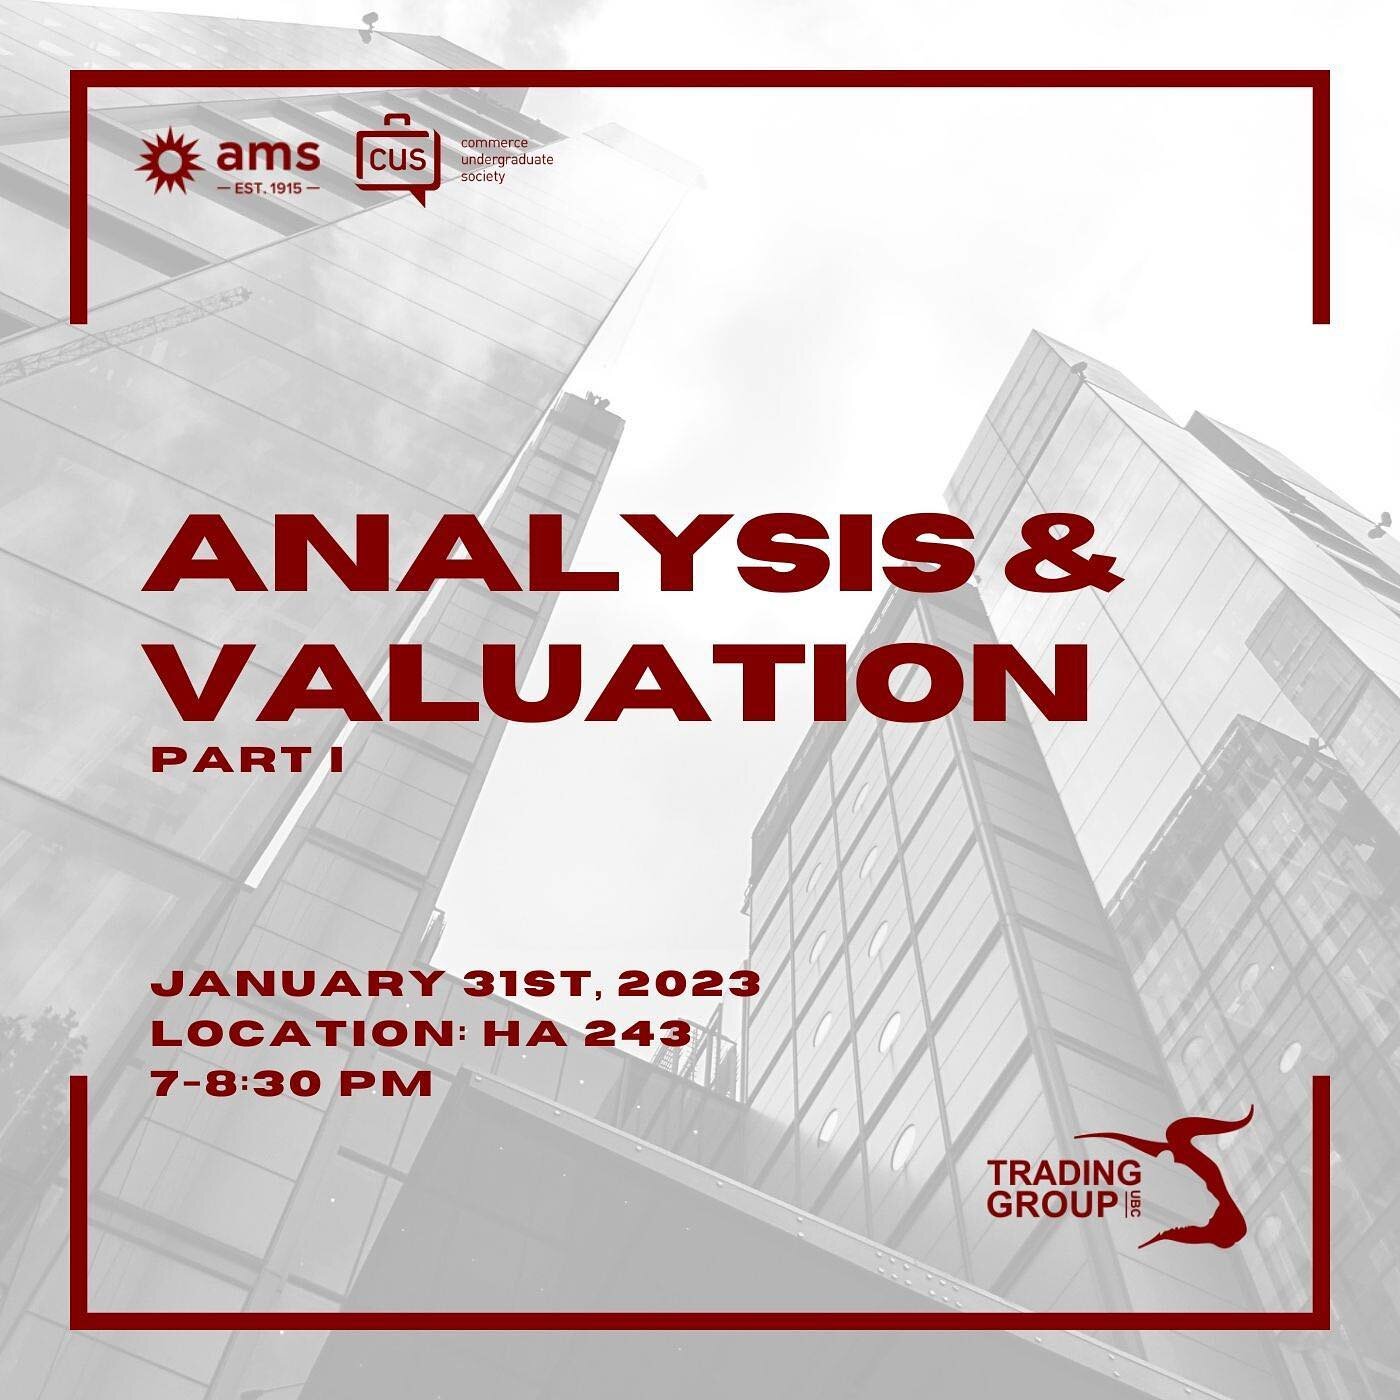 ✨ We&rsquo;re excited to announce the first instalment of our Valuation and Technical Analysis Workshop!

This free &amp; beginner-friendly event will follow up on our previous workshop and cover additional topics such as:

- Candlestick Patterns
- I